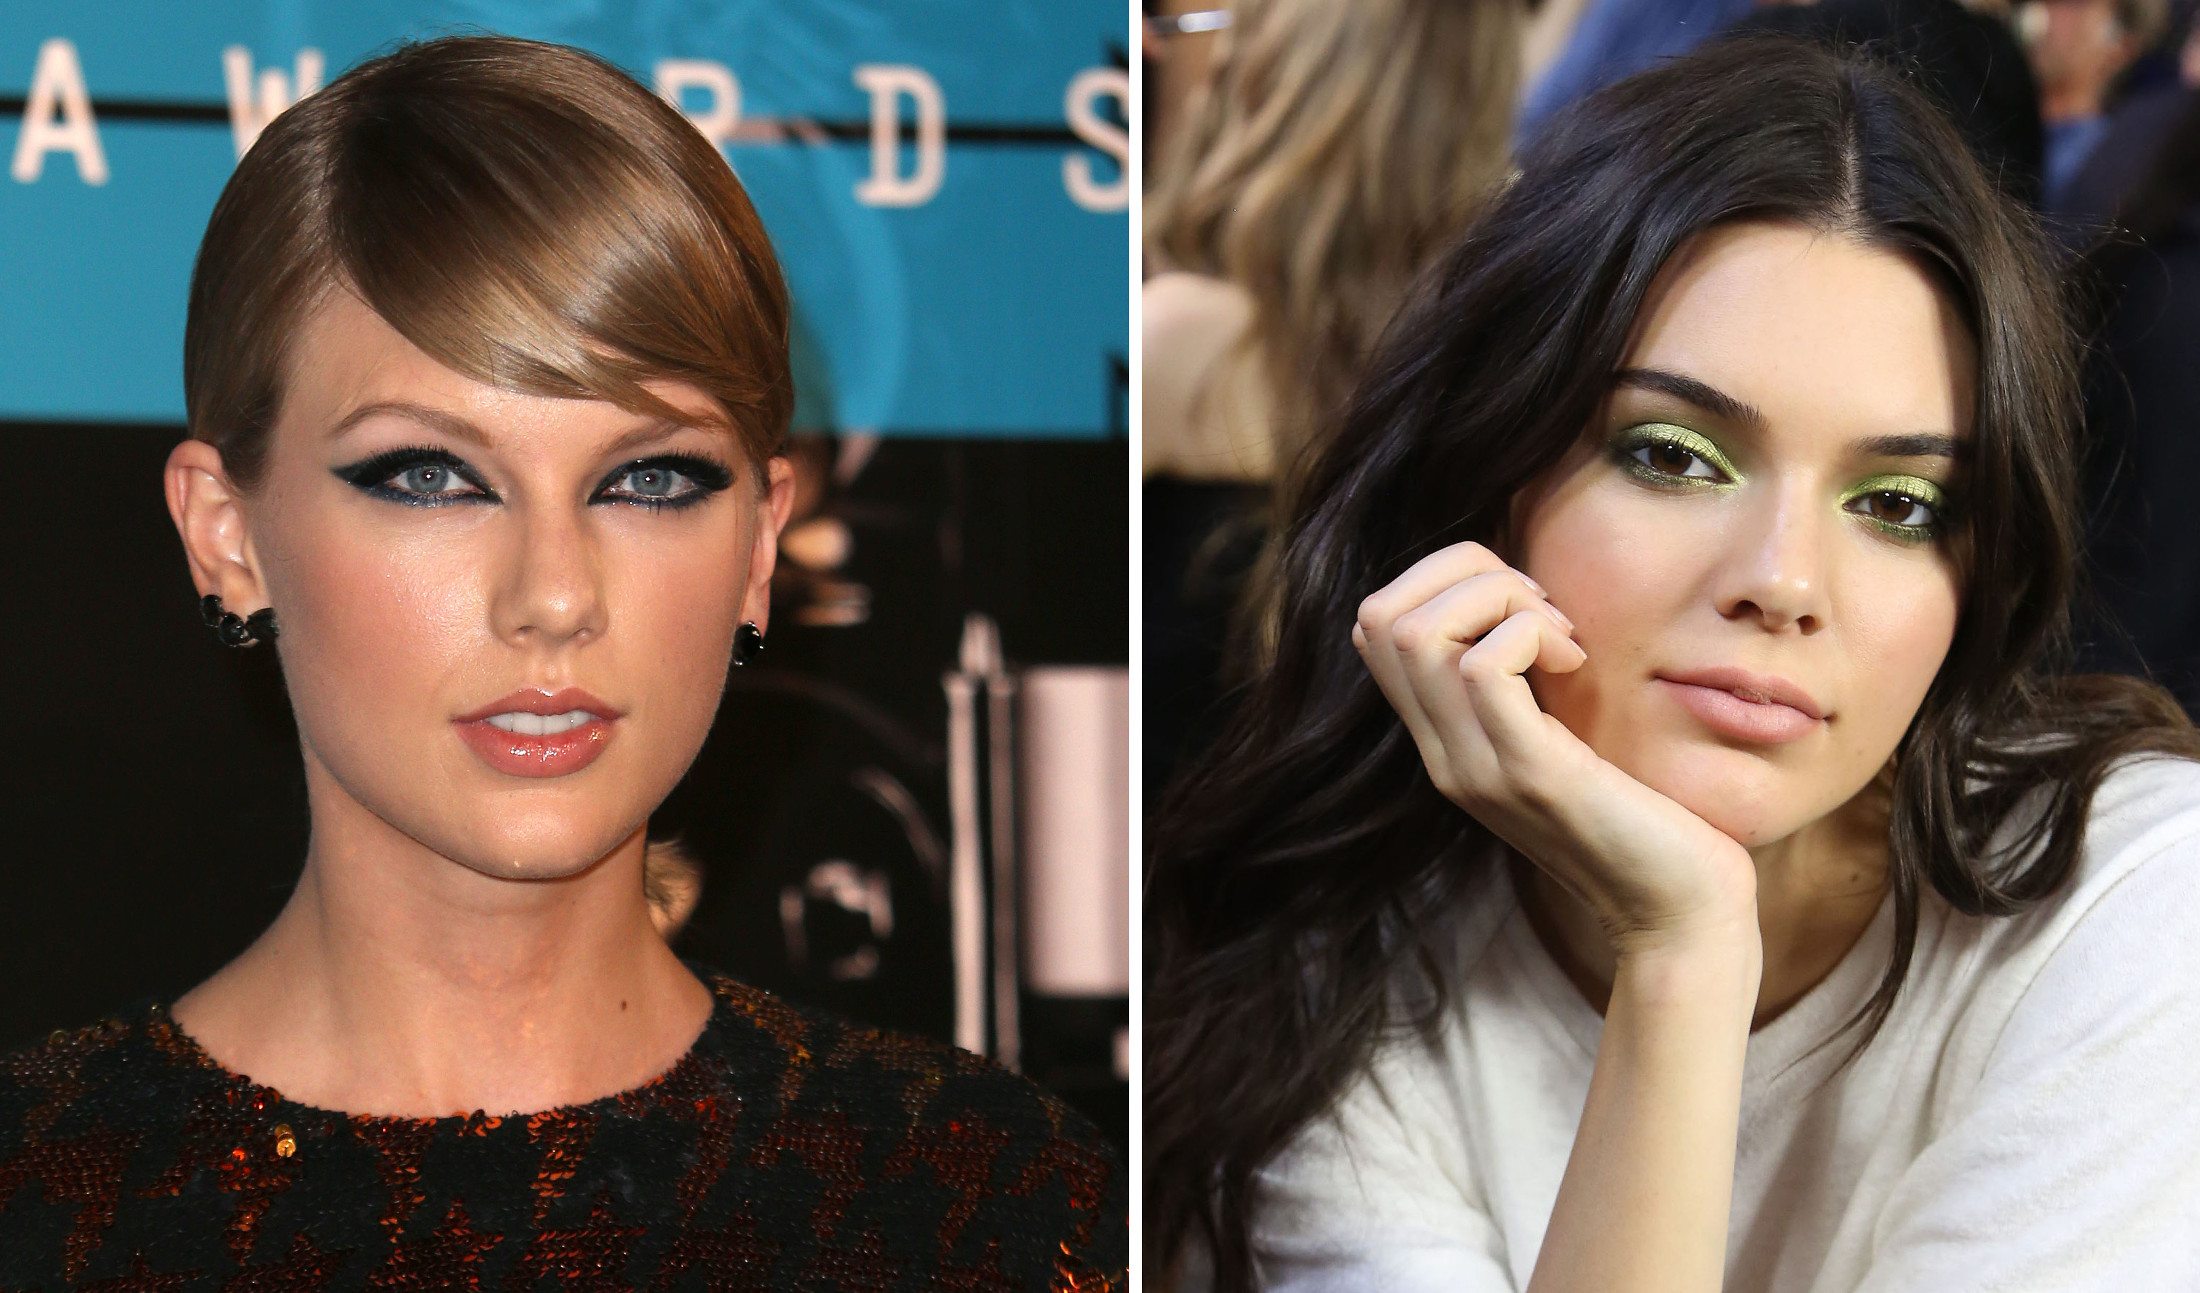 Kendall Jenner and her relationship with Taylor Swift